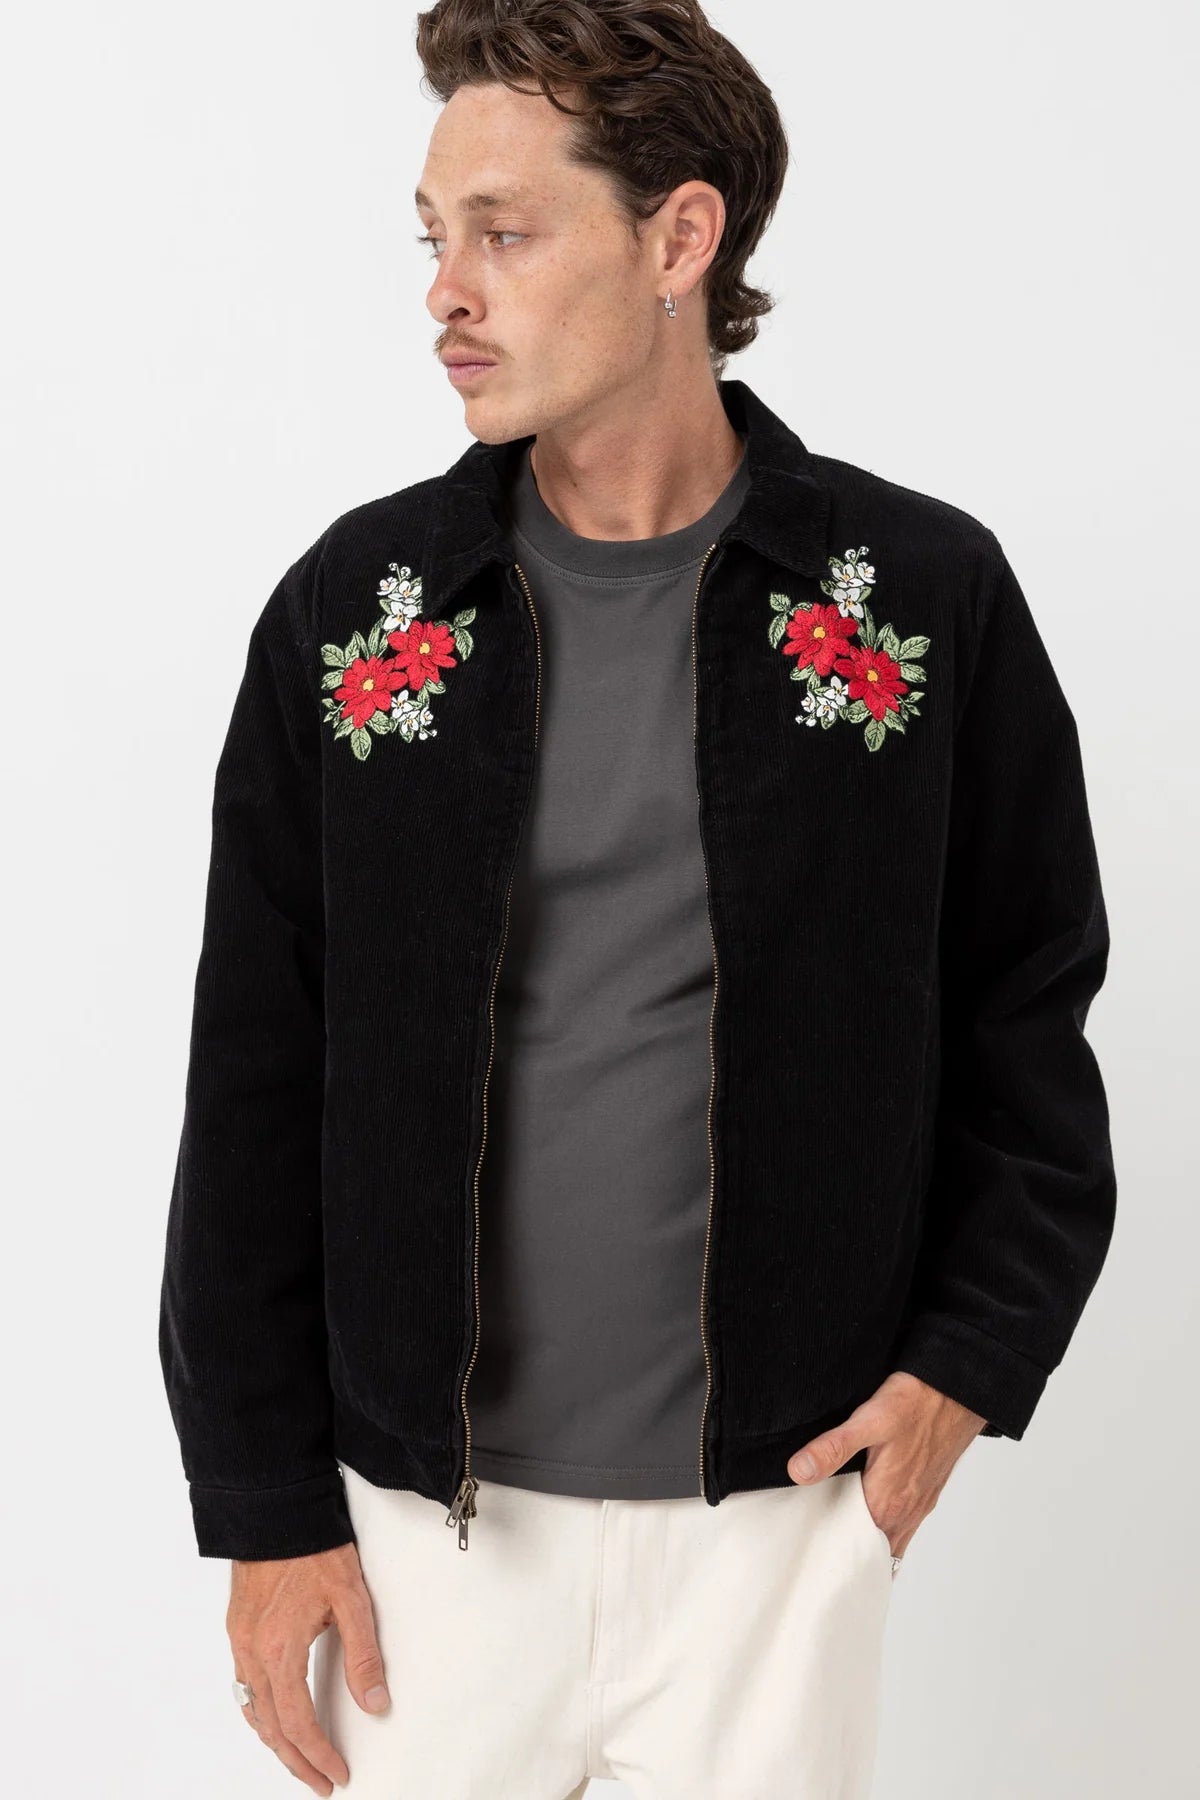 rhythm cord james jacket zip up black floral print embroidered stitch kempt athens ga mens clothing store downtown athens ga